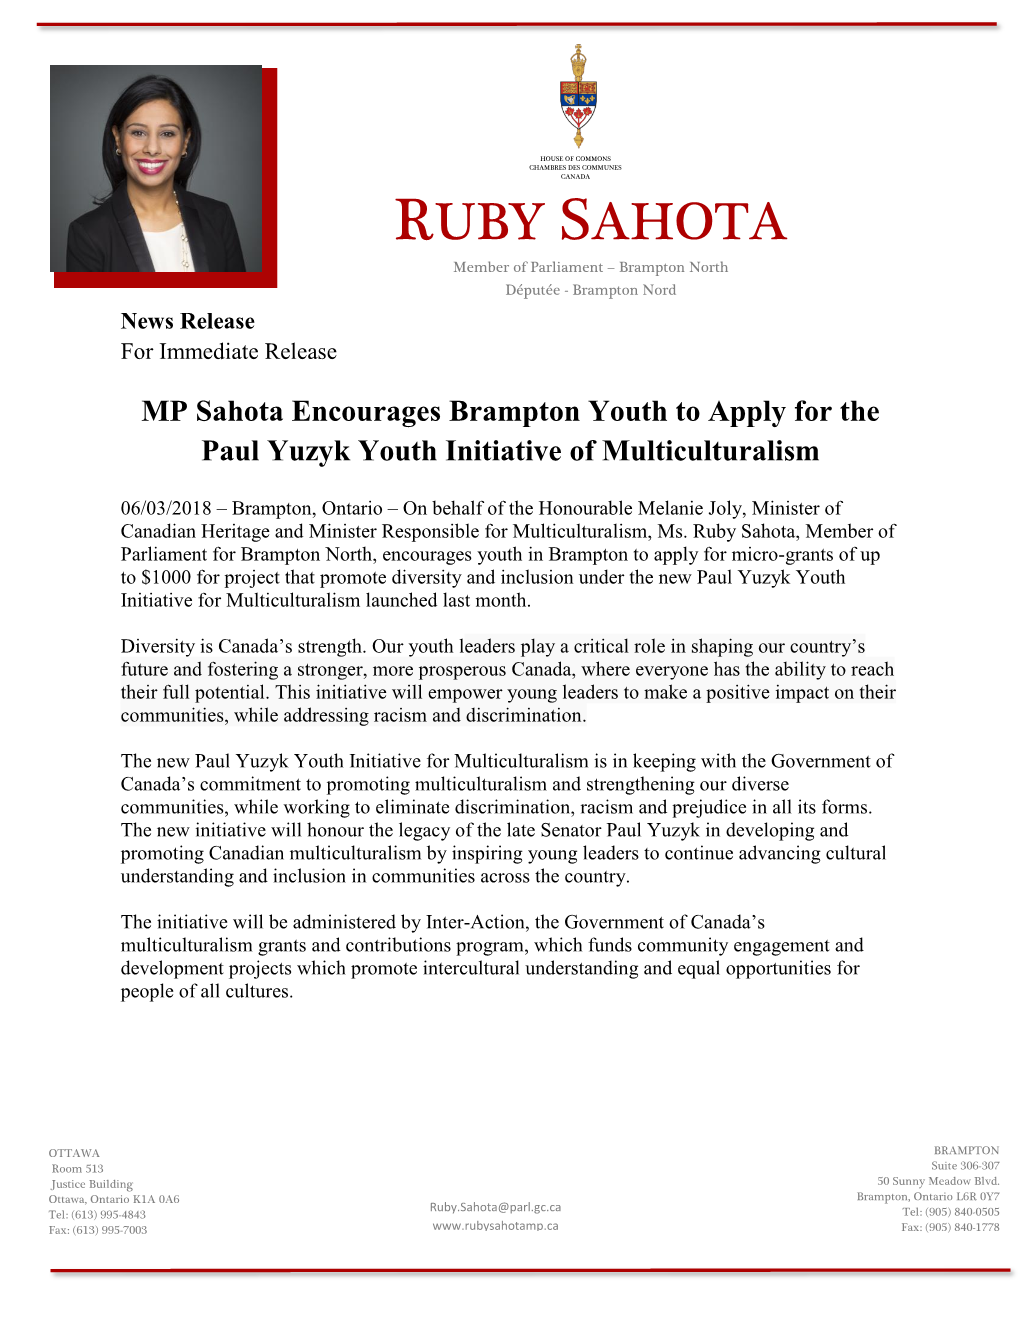 MP Sahota Encourages Brampton Youth to Apply for the Paul Yuzyk Youth Initiative of Multiculturalism